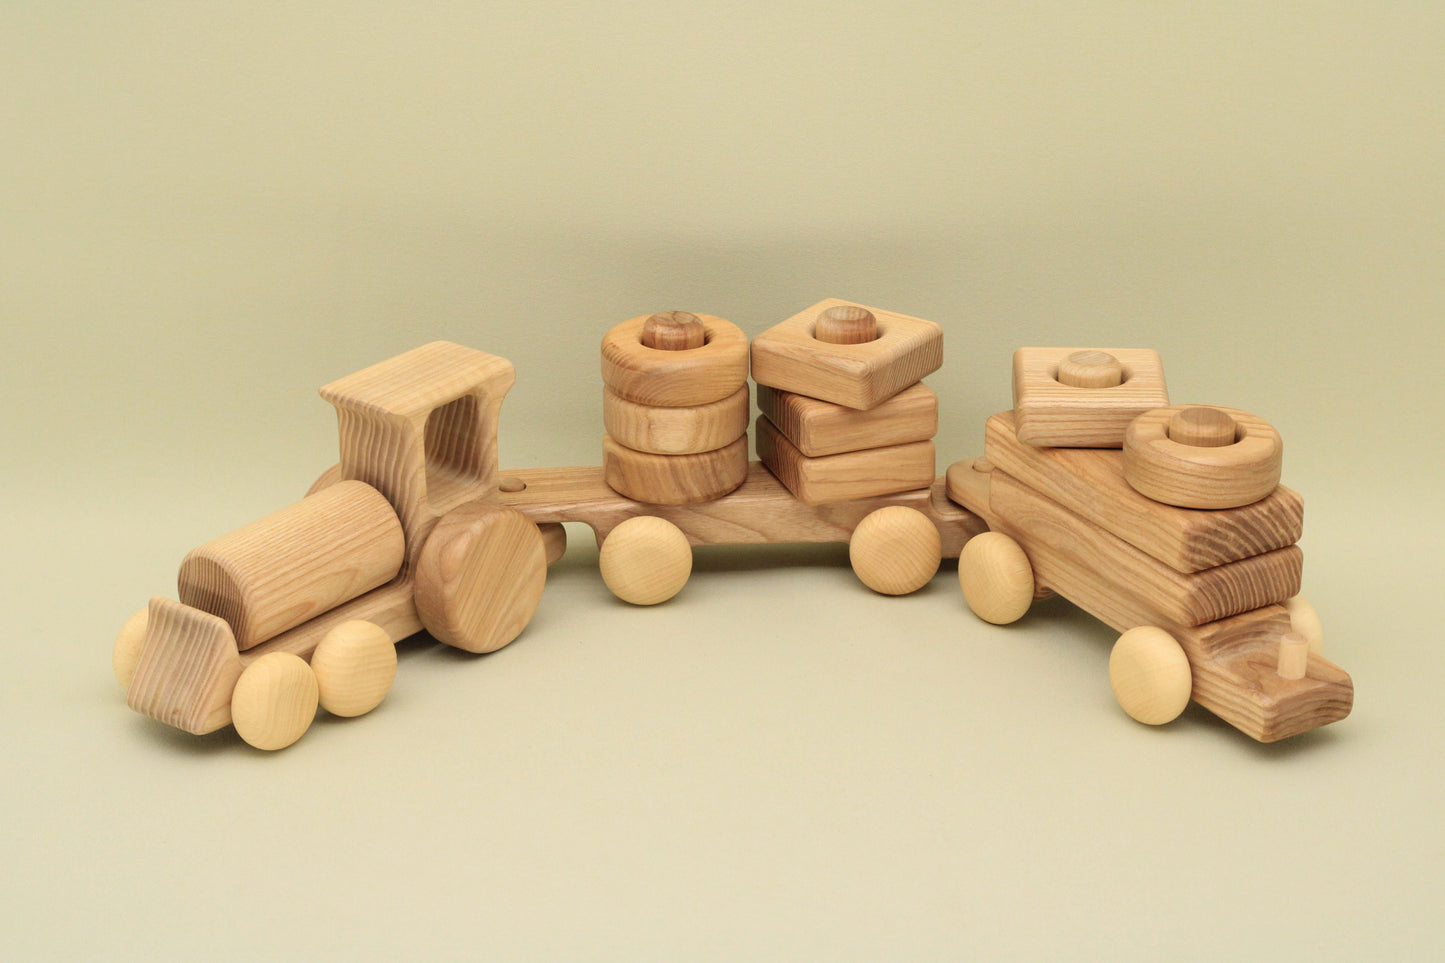 Lotes Toys Wooden Construction Train BT15